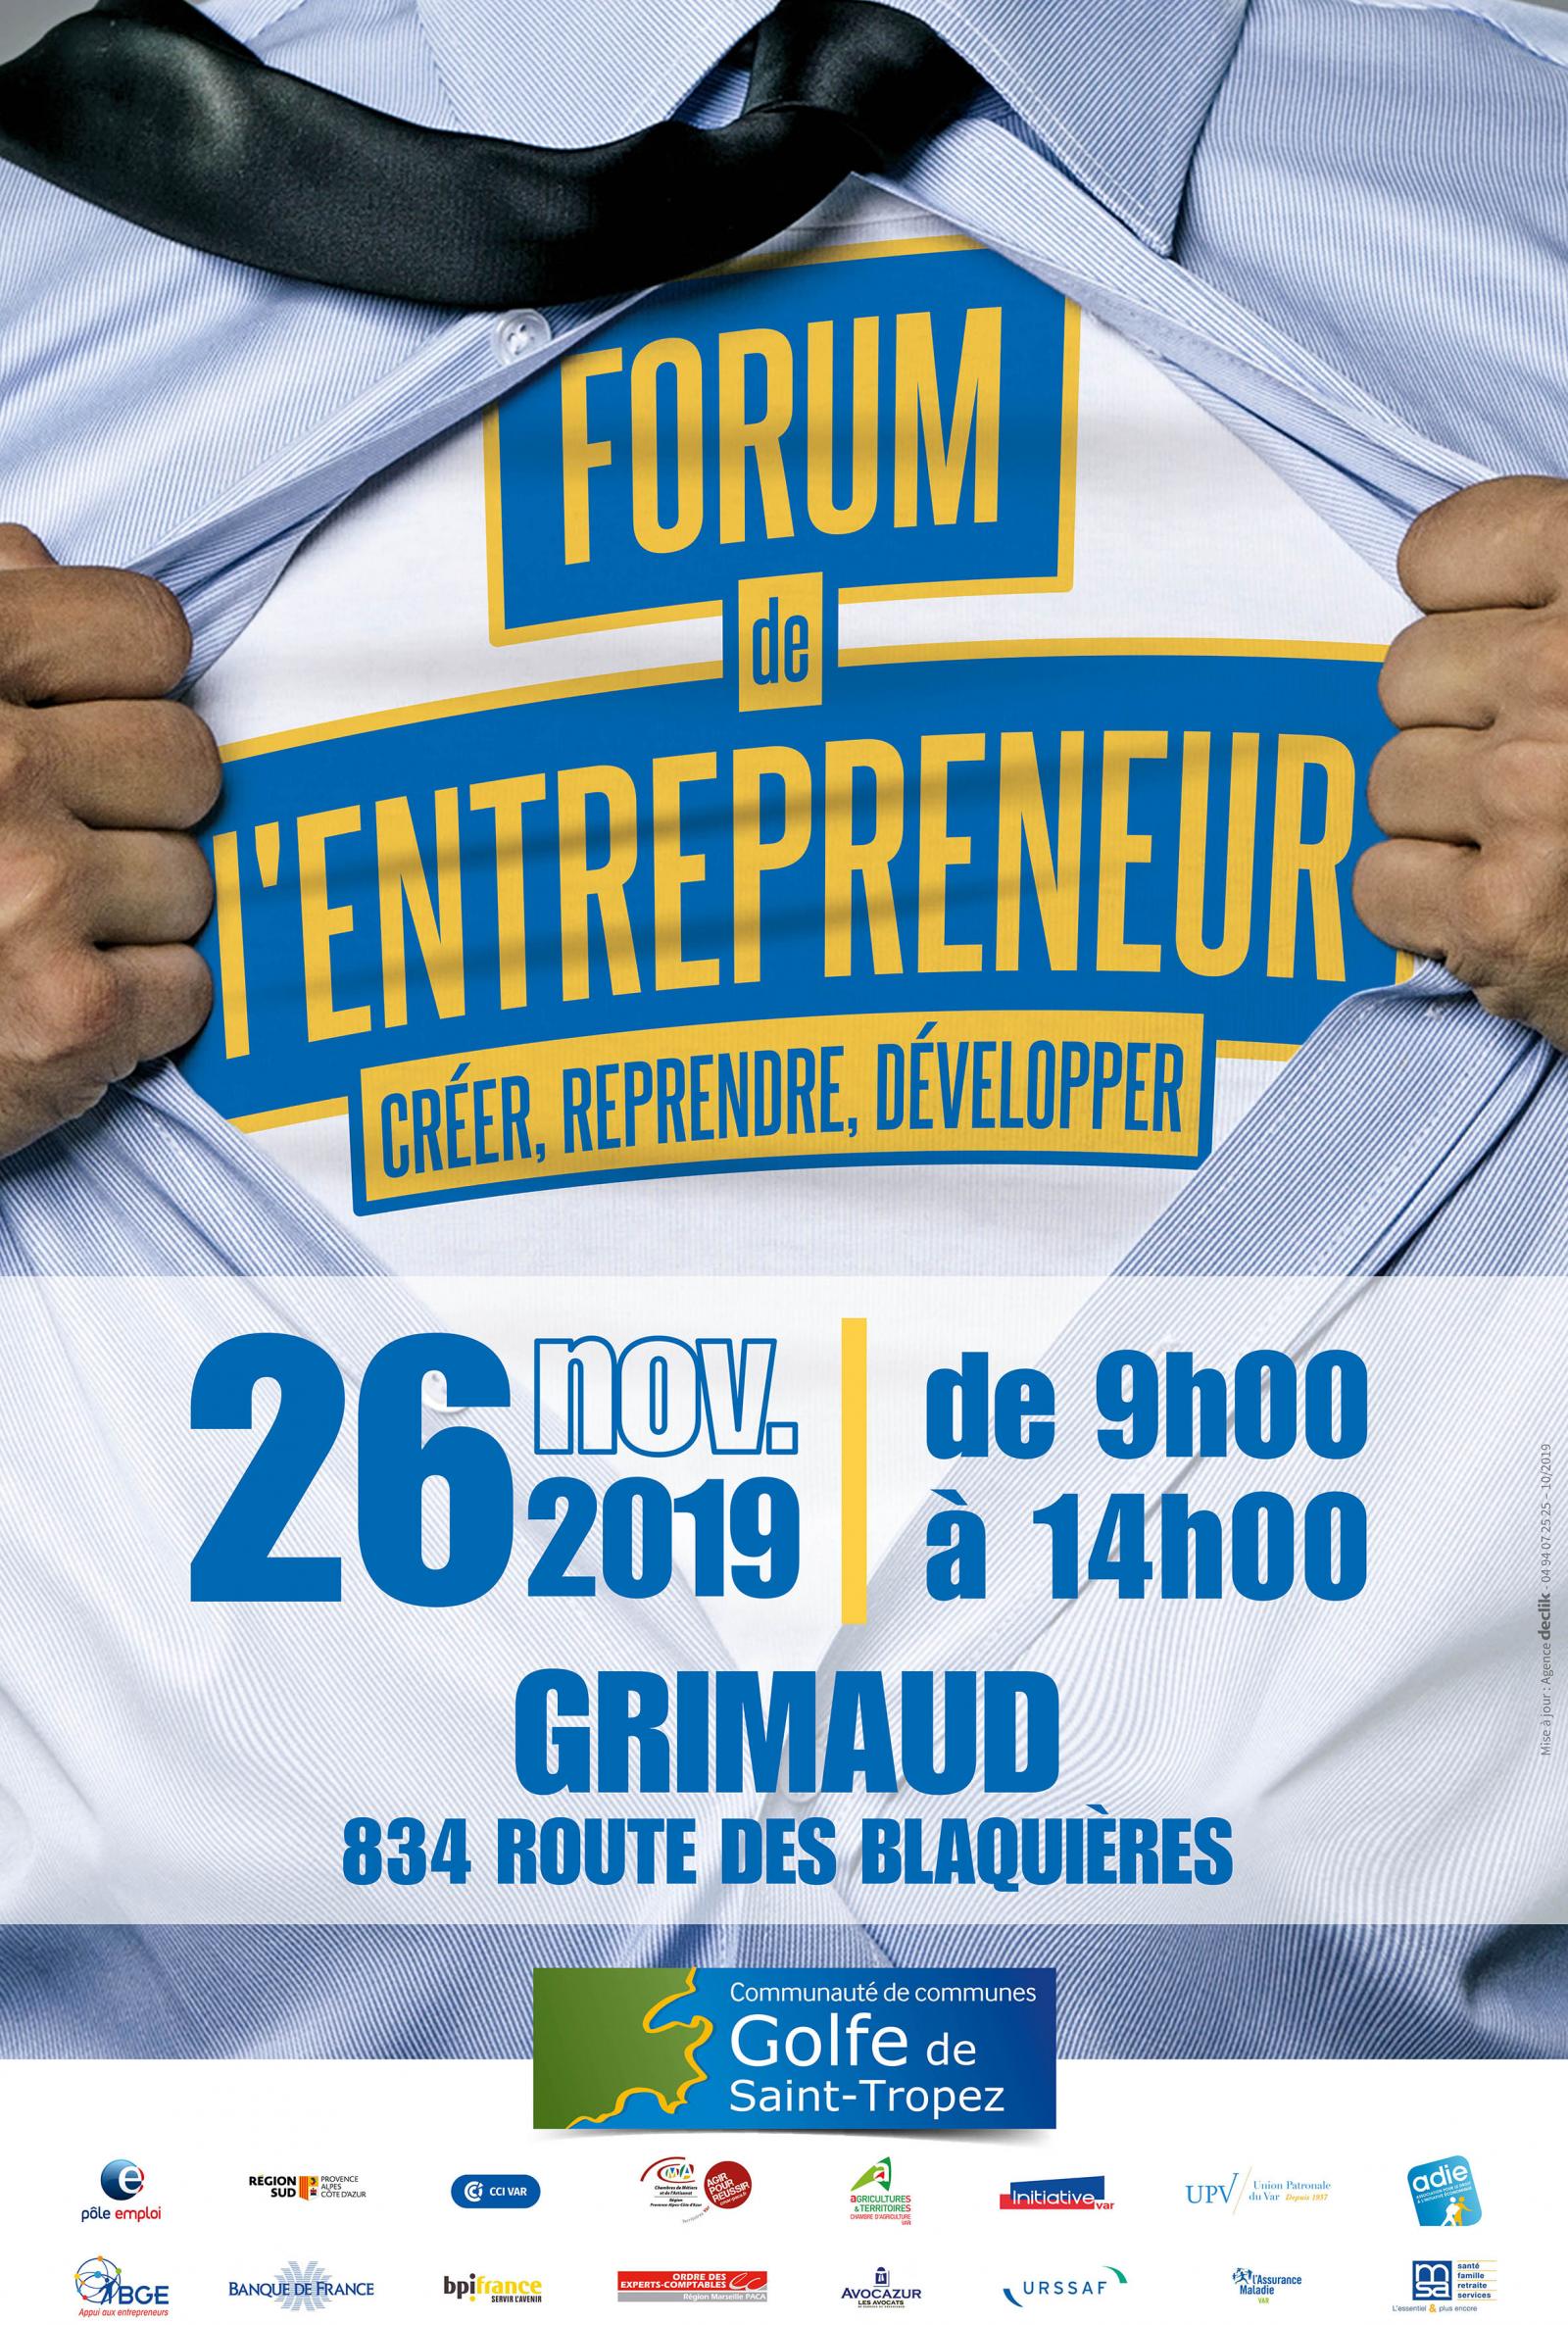 Tuesday, November 26 from 9:00 to 14:00: Entrepreneur Forum in Grimaud